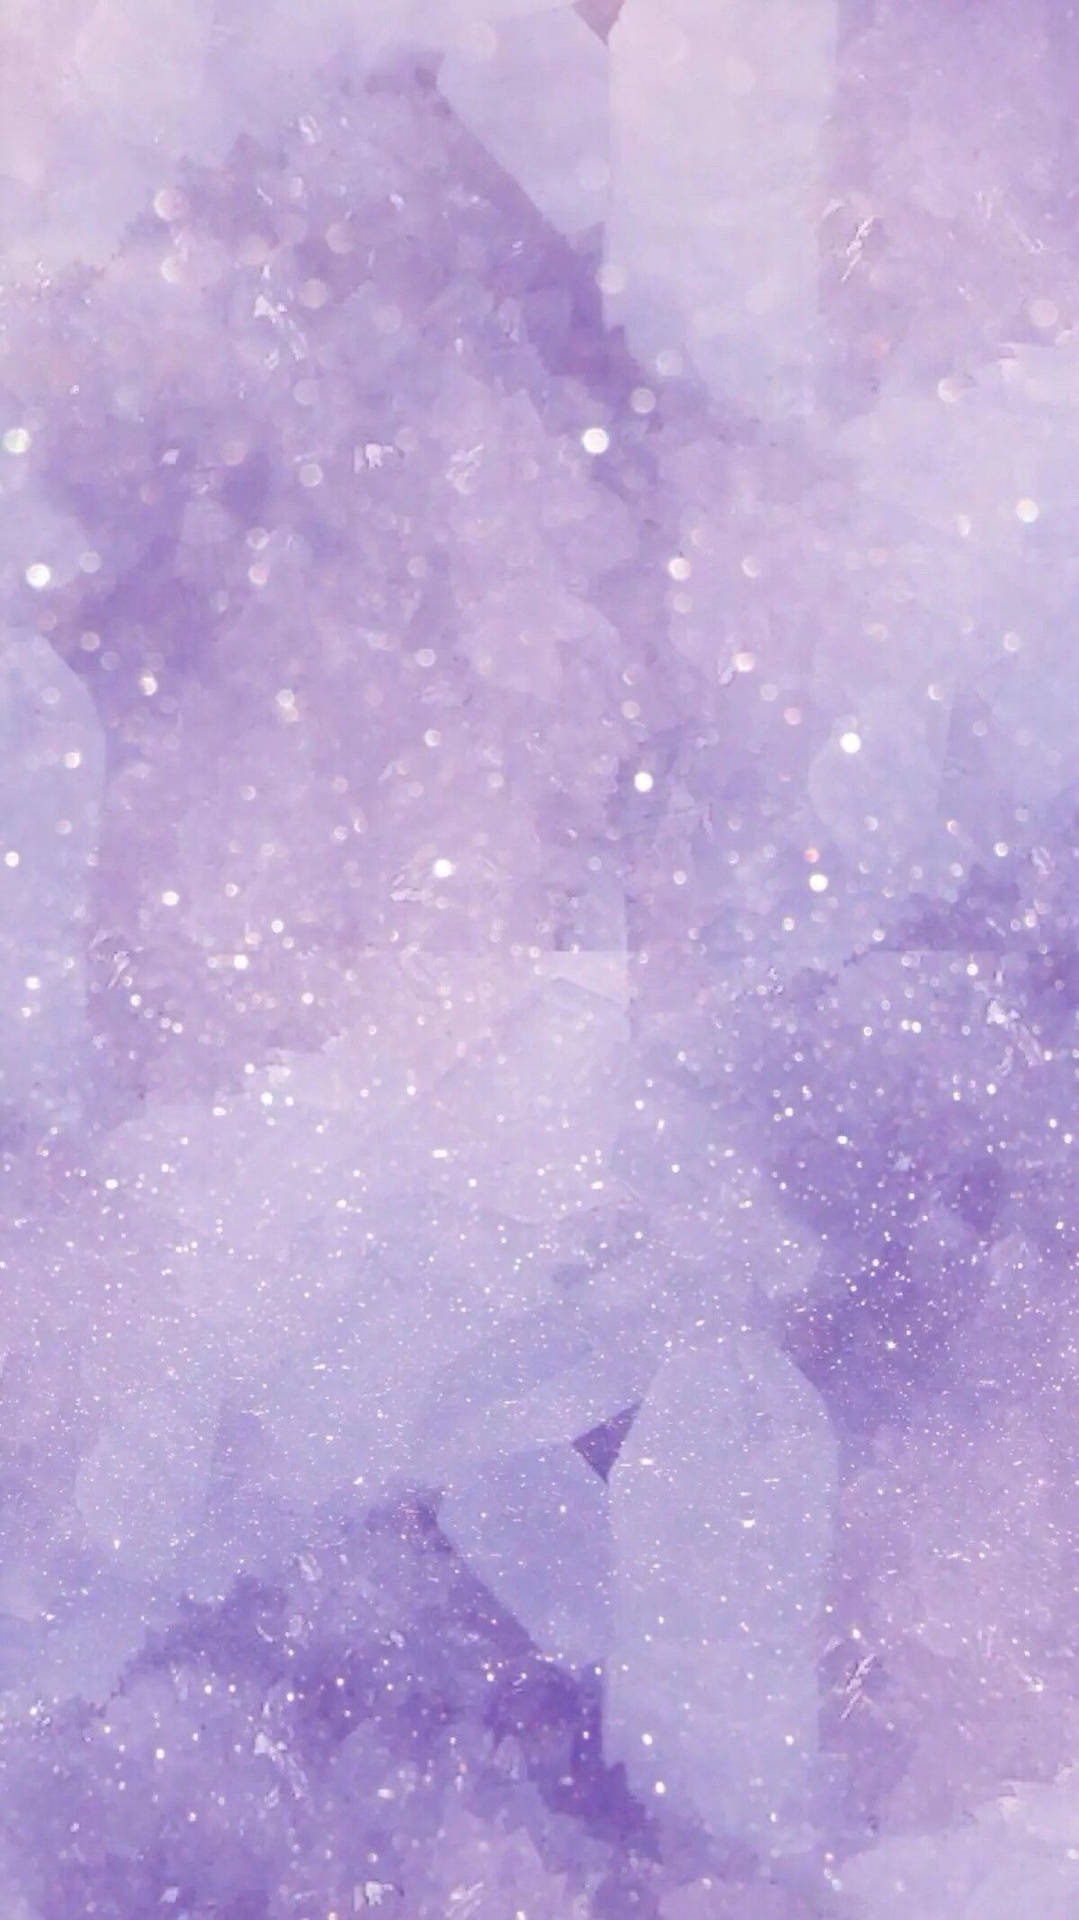 Glittery Crystals Light Purple Iphone Background